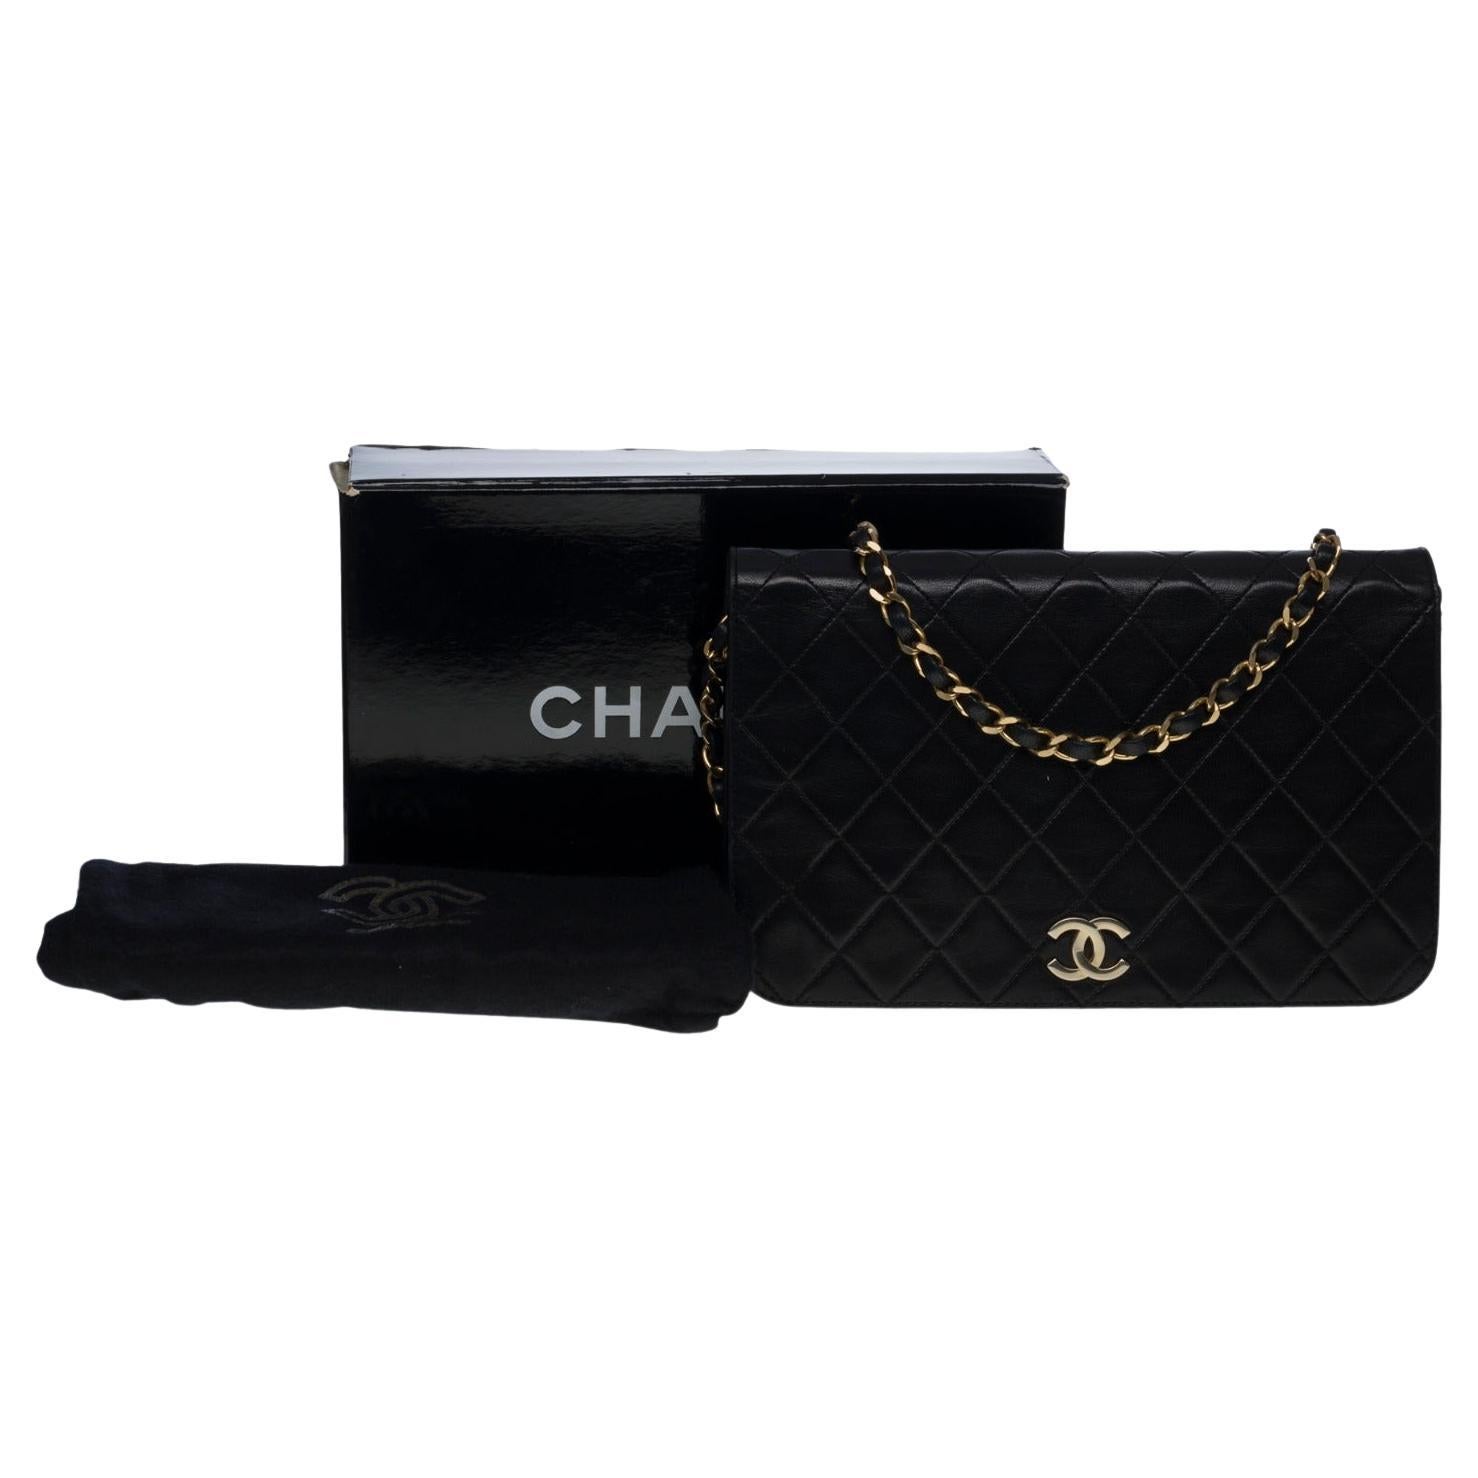 Chanel Classic Full Flap shoulder bag in black quilted lambskin leather, GHW